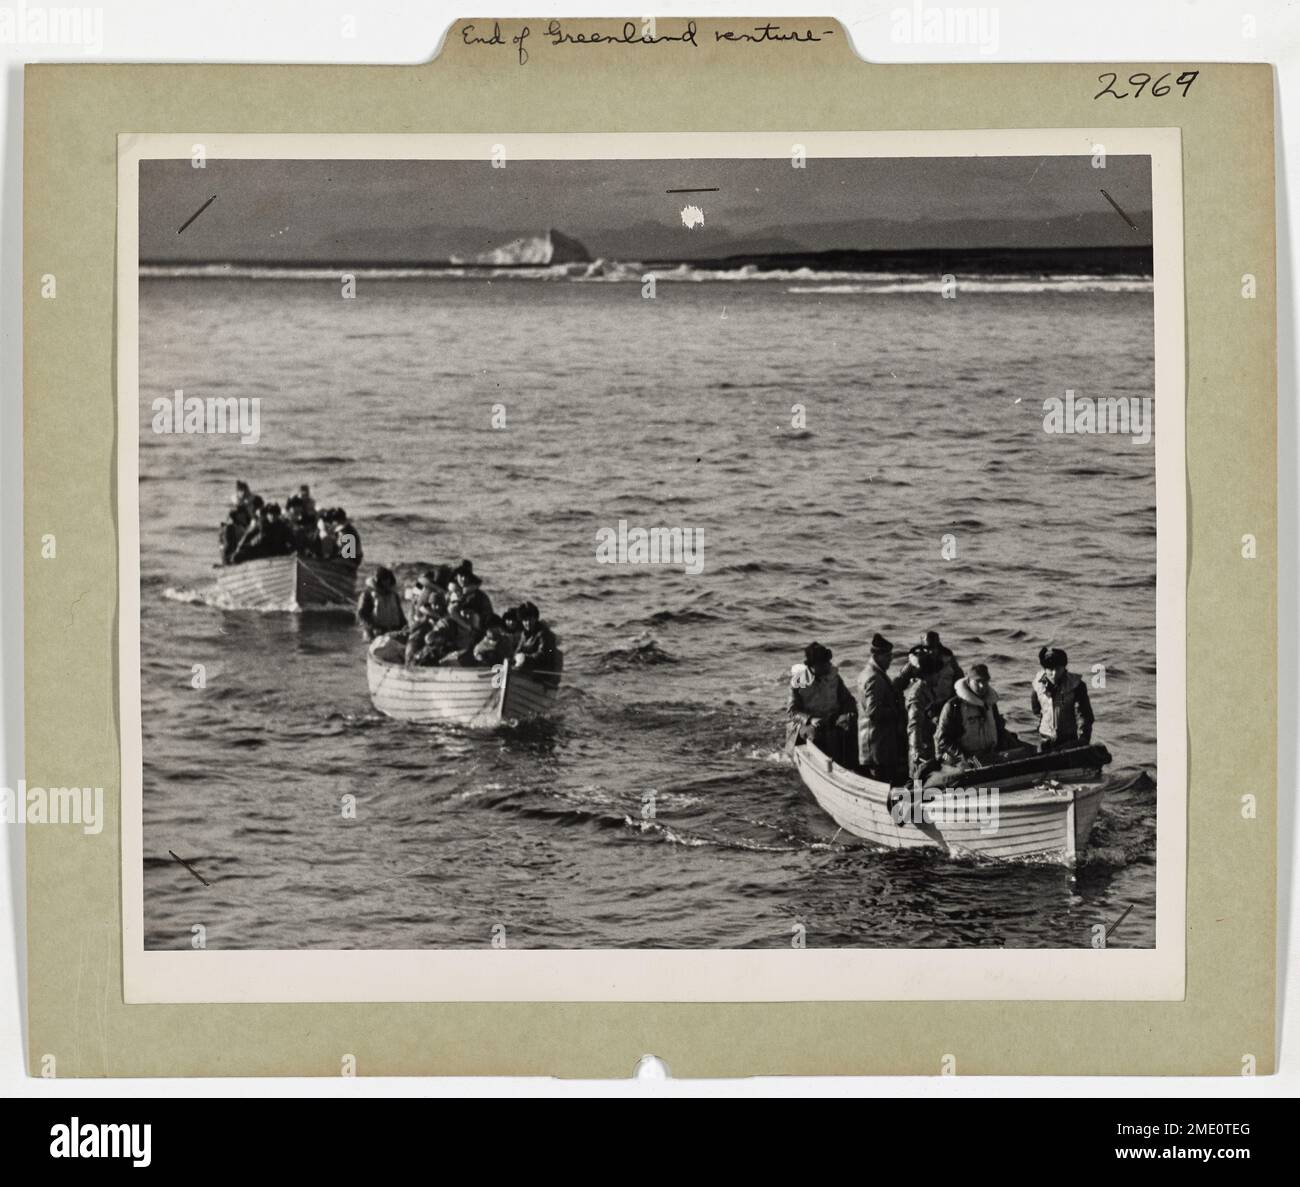 End Of A Greenland Adventure - 28 Nazi Captured by Coast Guard. This image depicts a the capture of a German expedition to establish a radio-weather station in Greenland; 28 Nazis surrendered to the Coast Guard cutter. Stock Photo